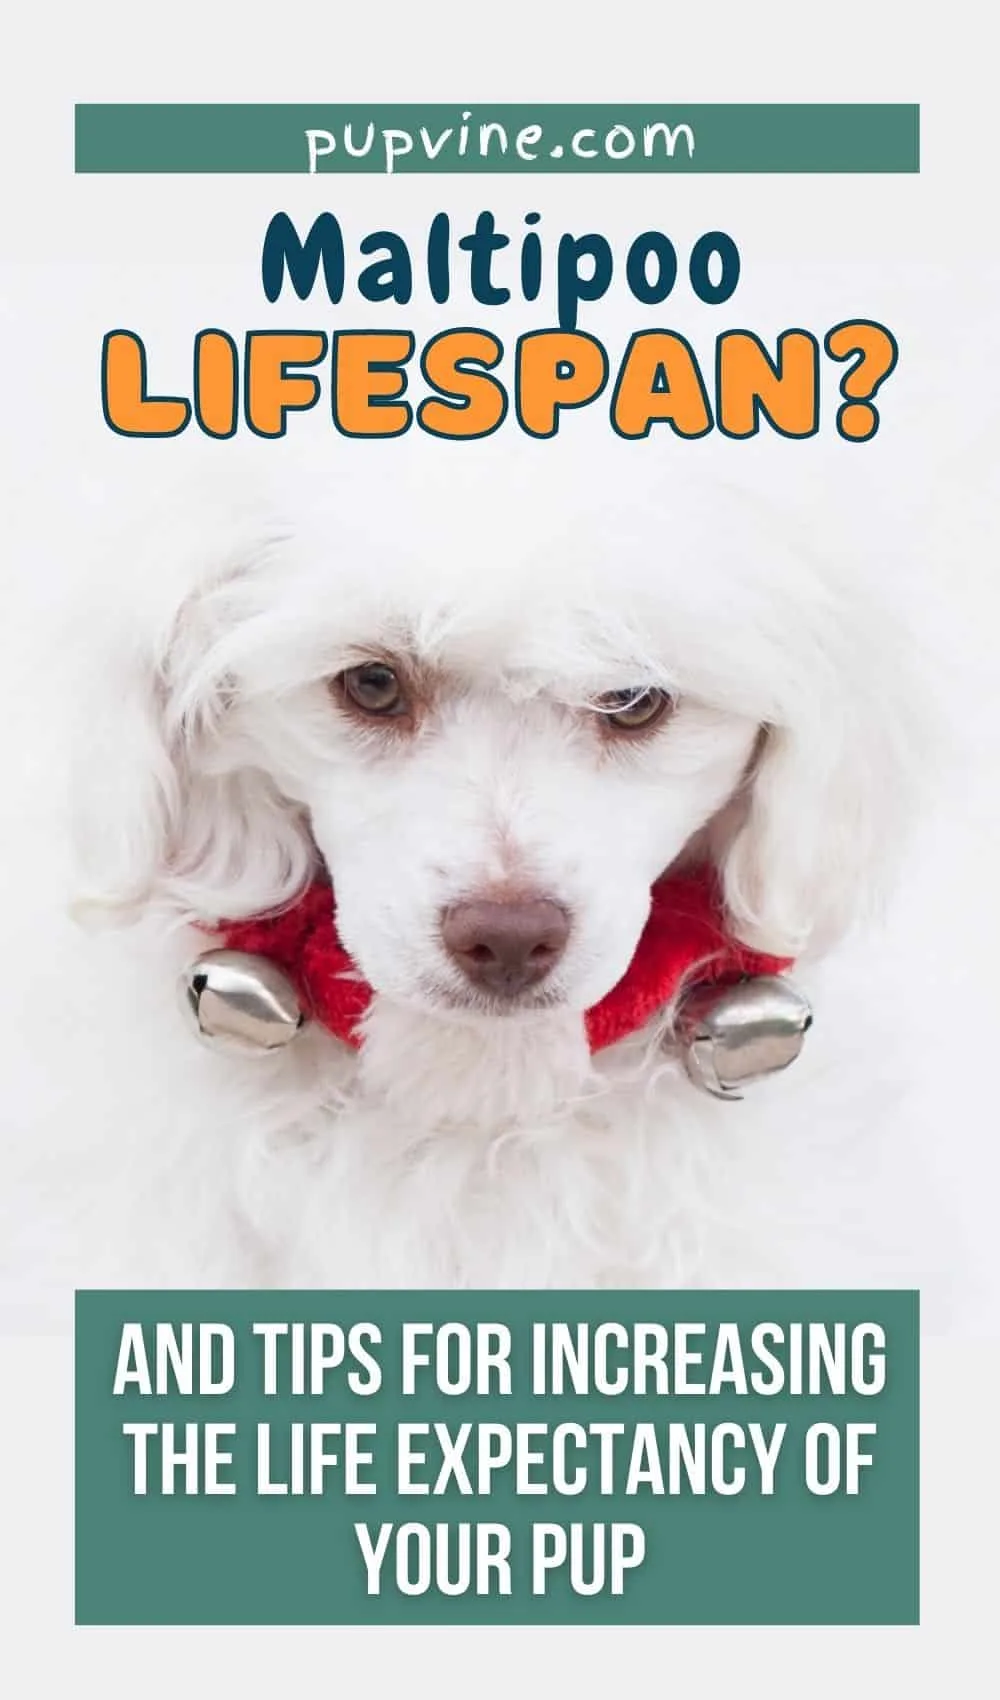 Maltipoo Lifespan And Tips For Increasing The Life Expectancy Of Your Pup